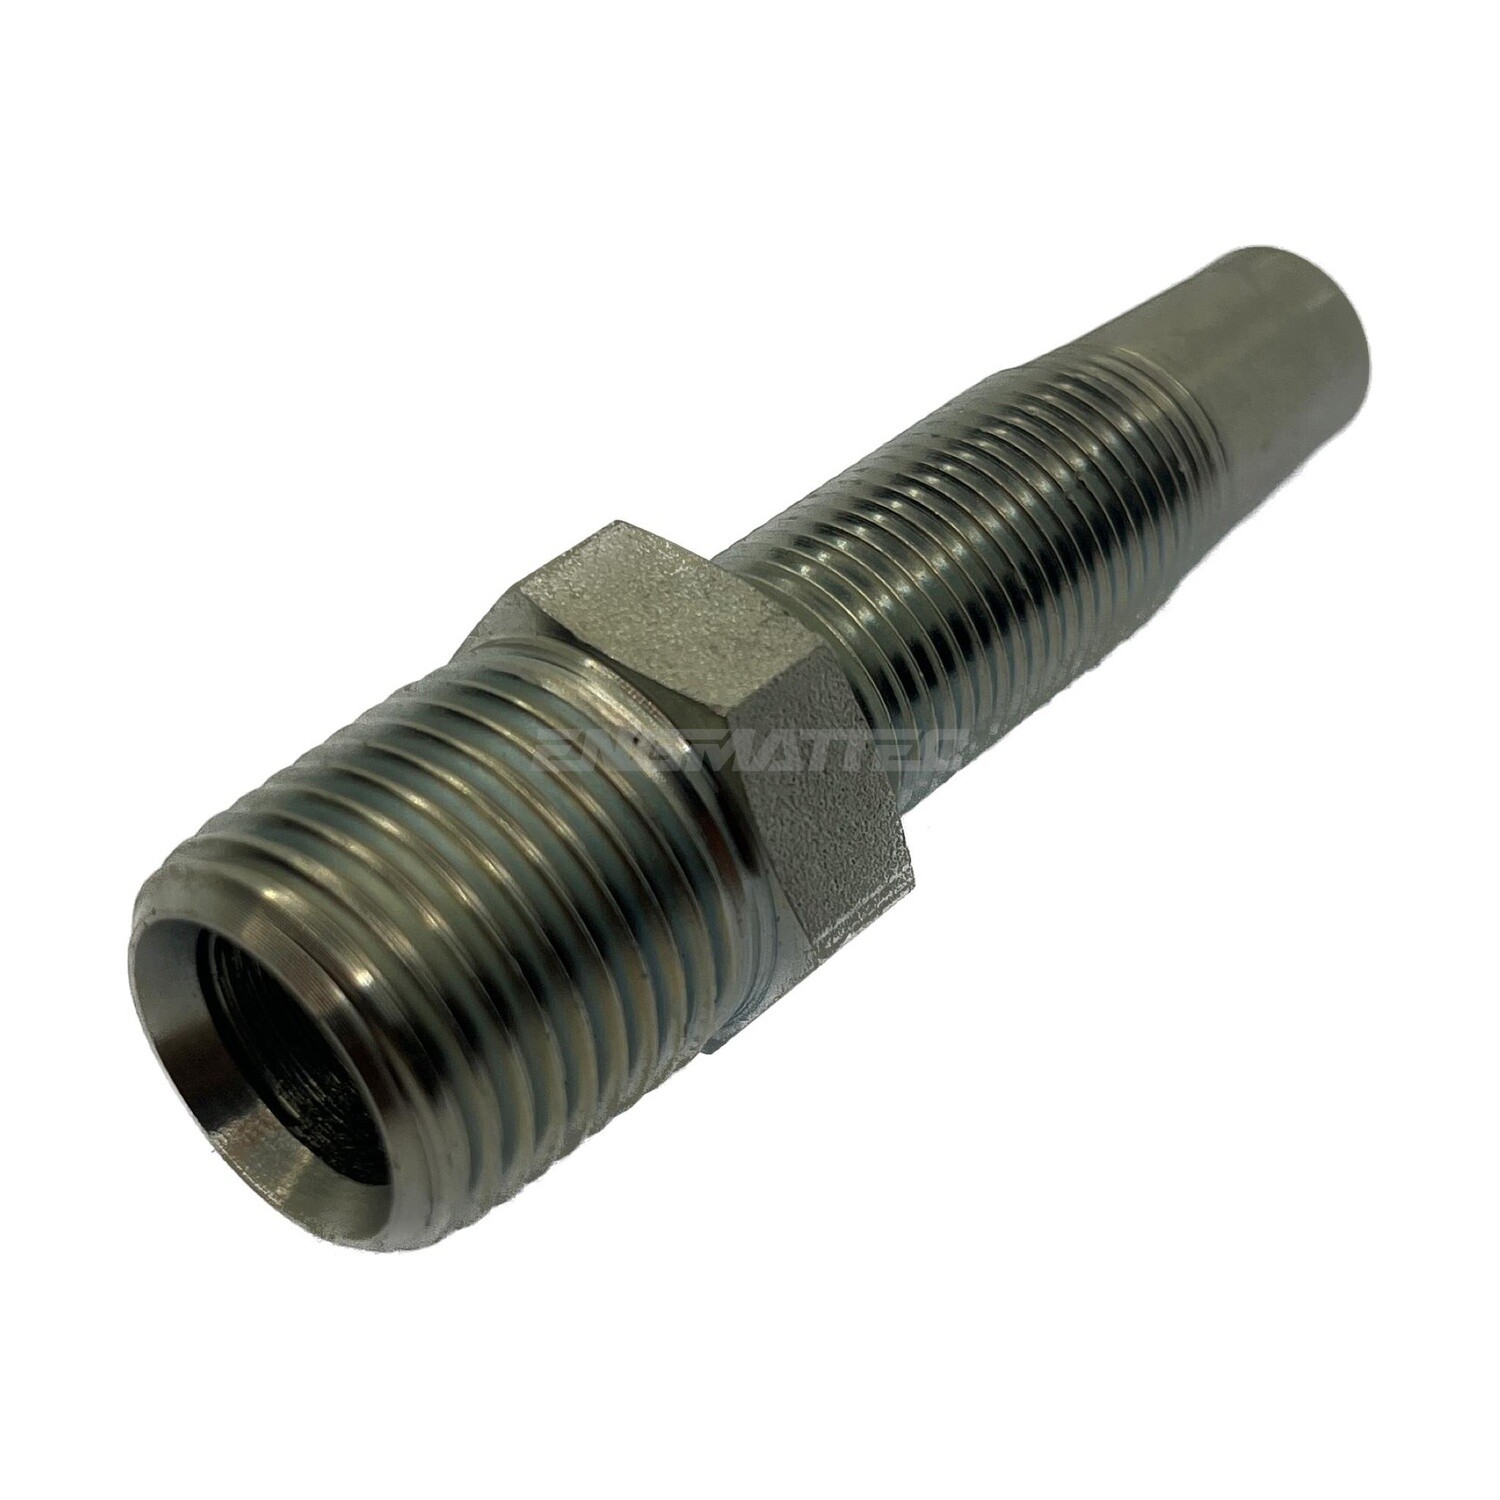 BSPT Male Field Fit Reusable Hydraulic Hose Fittings (Straight)